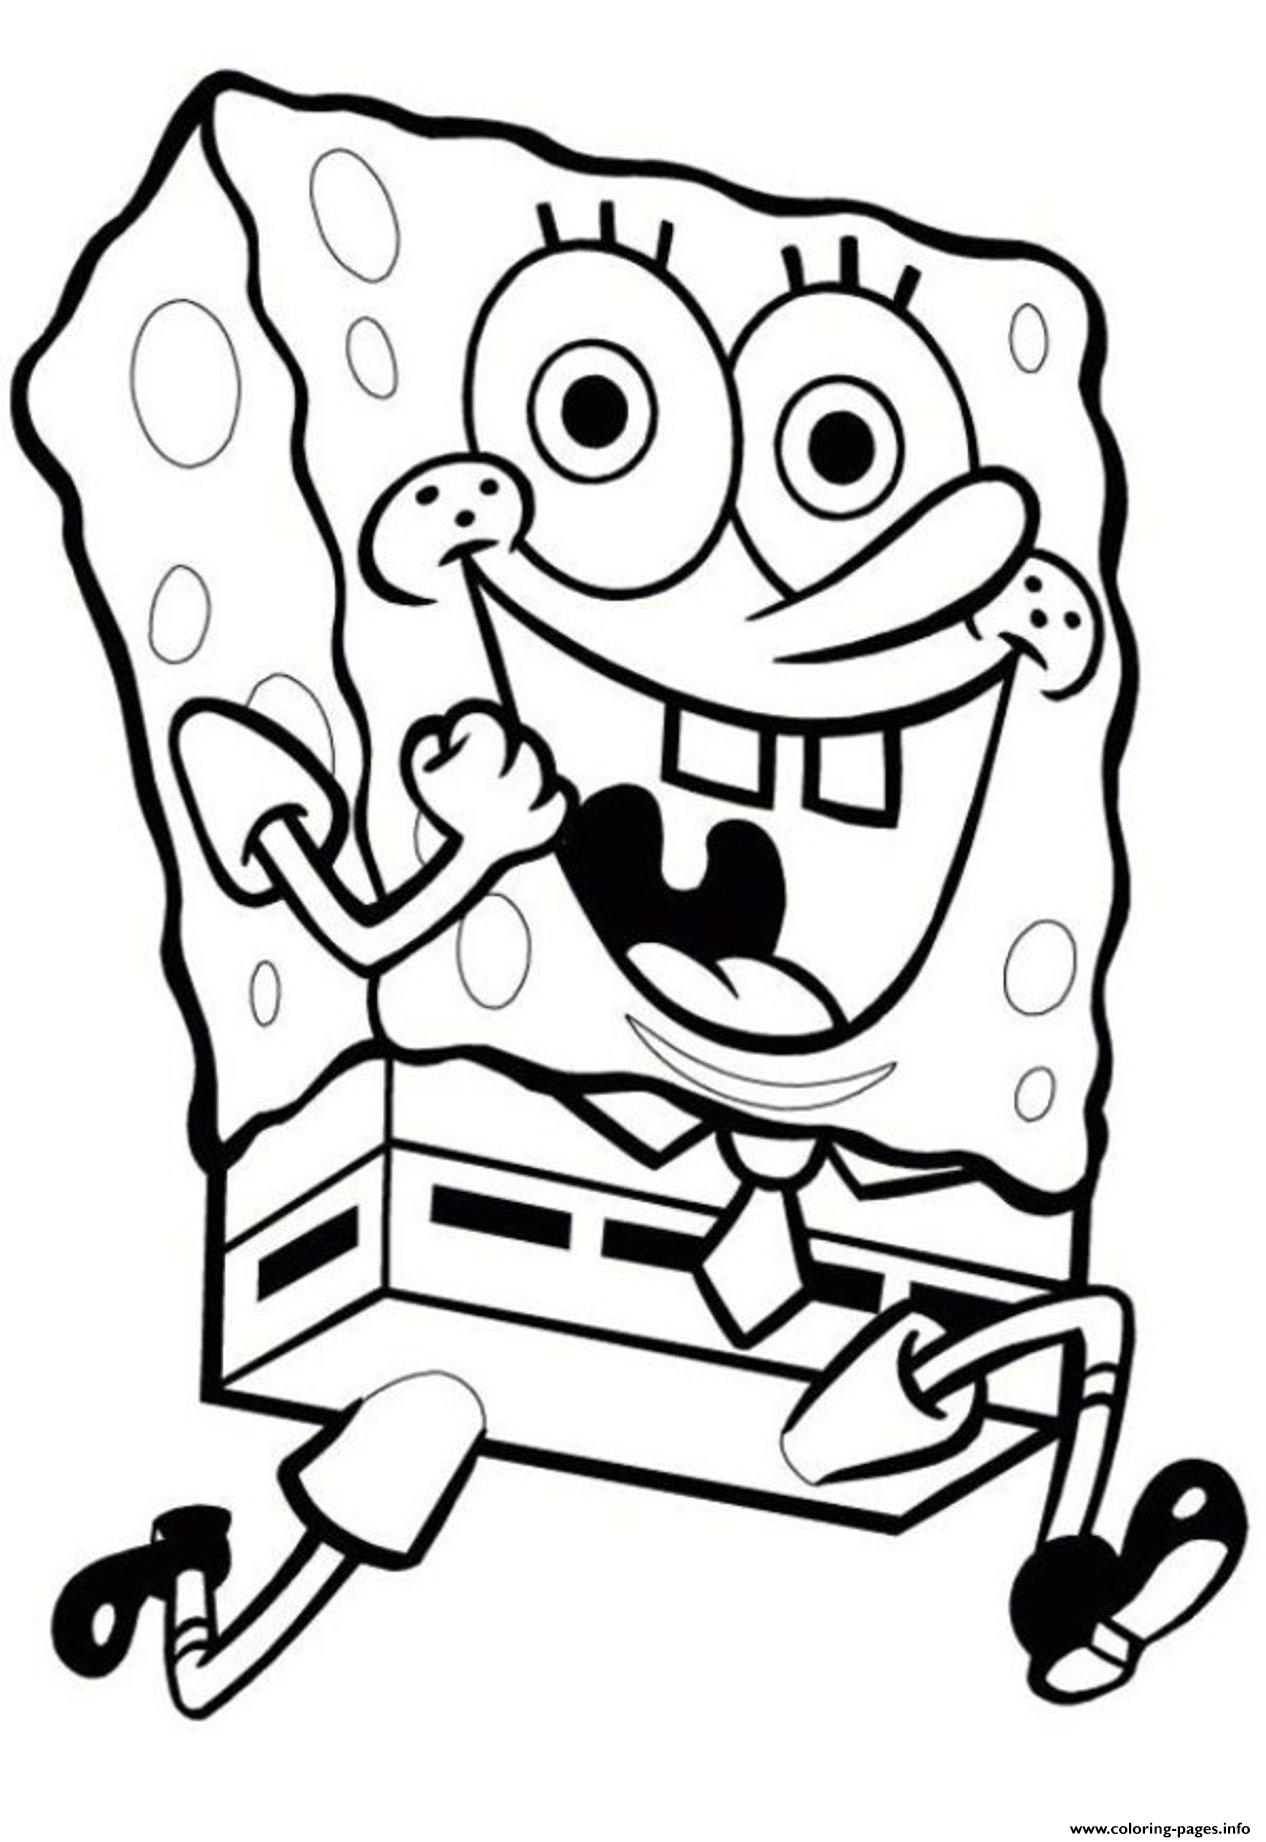 Coloring Pages Spongebob Running20b20e Coloring page Printable